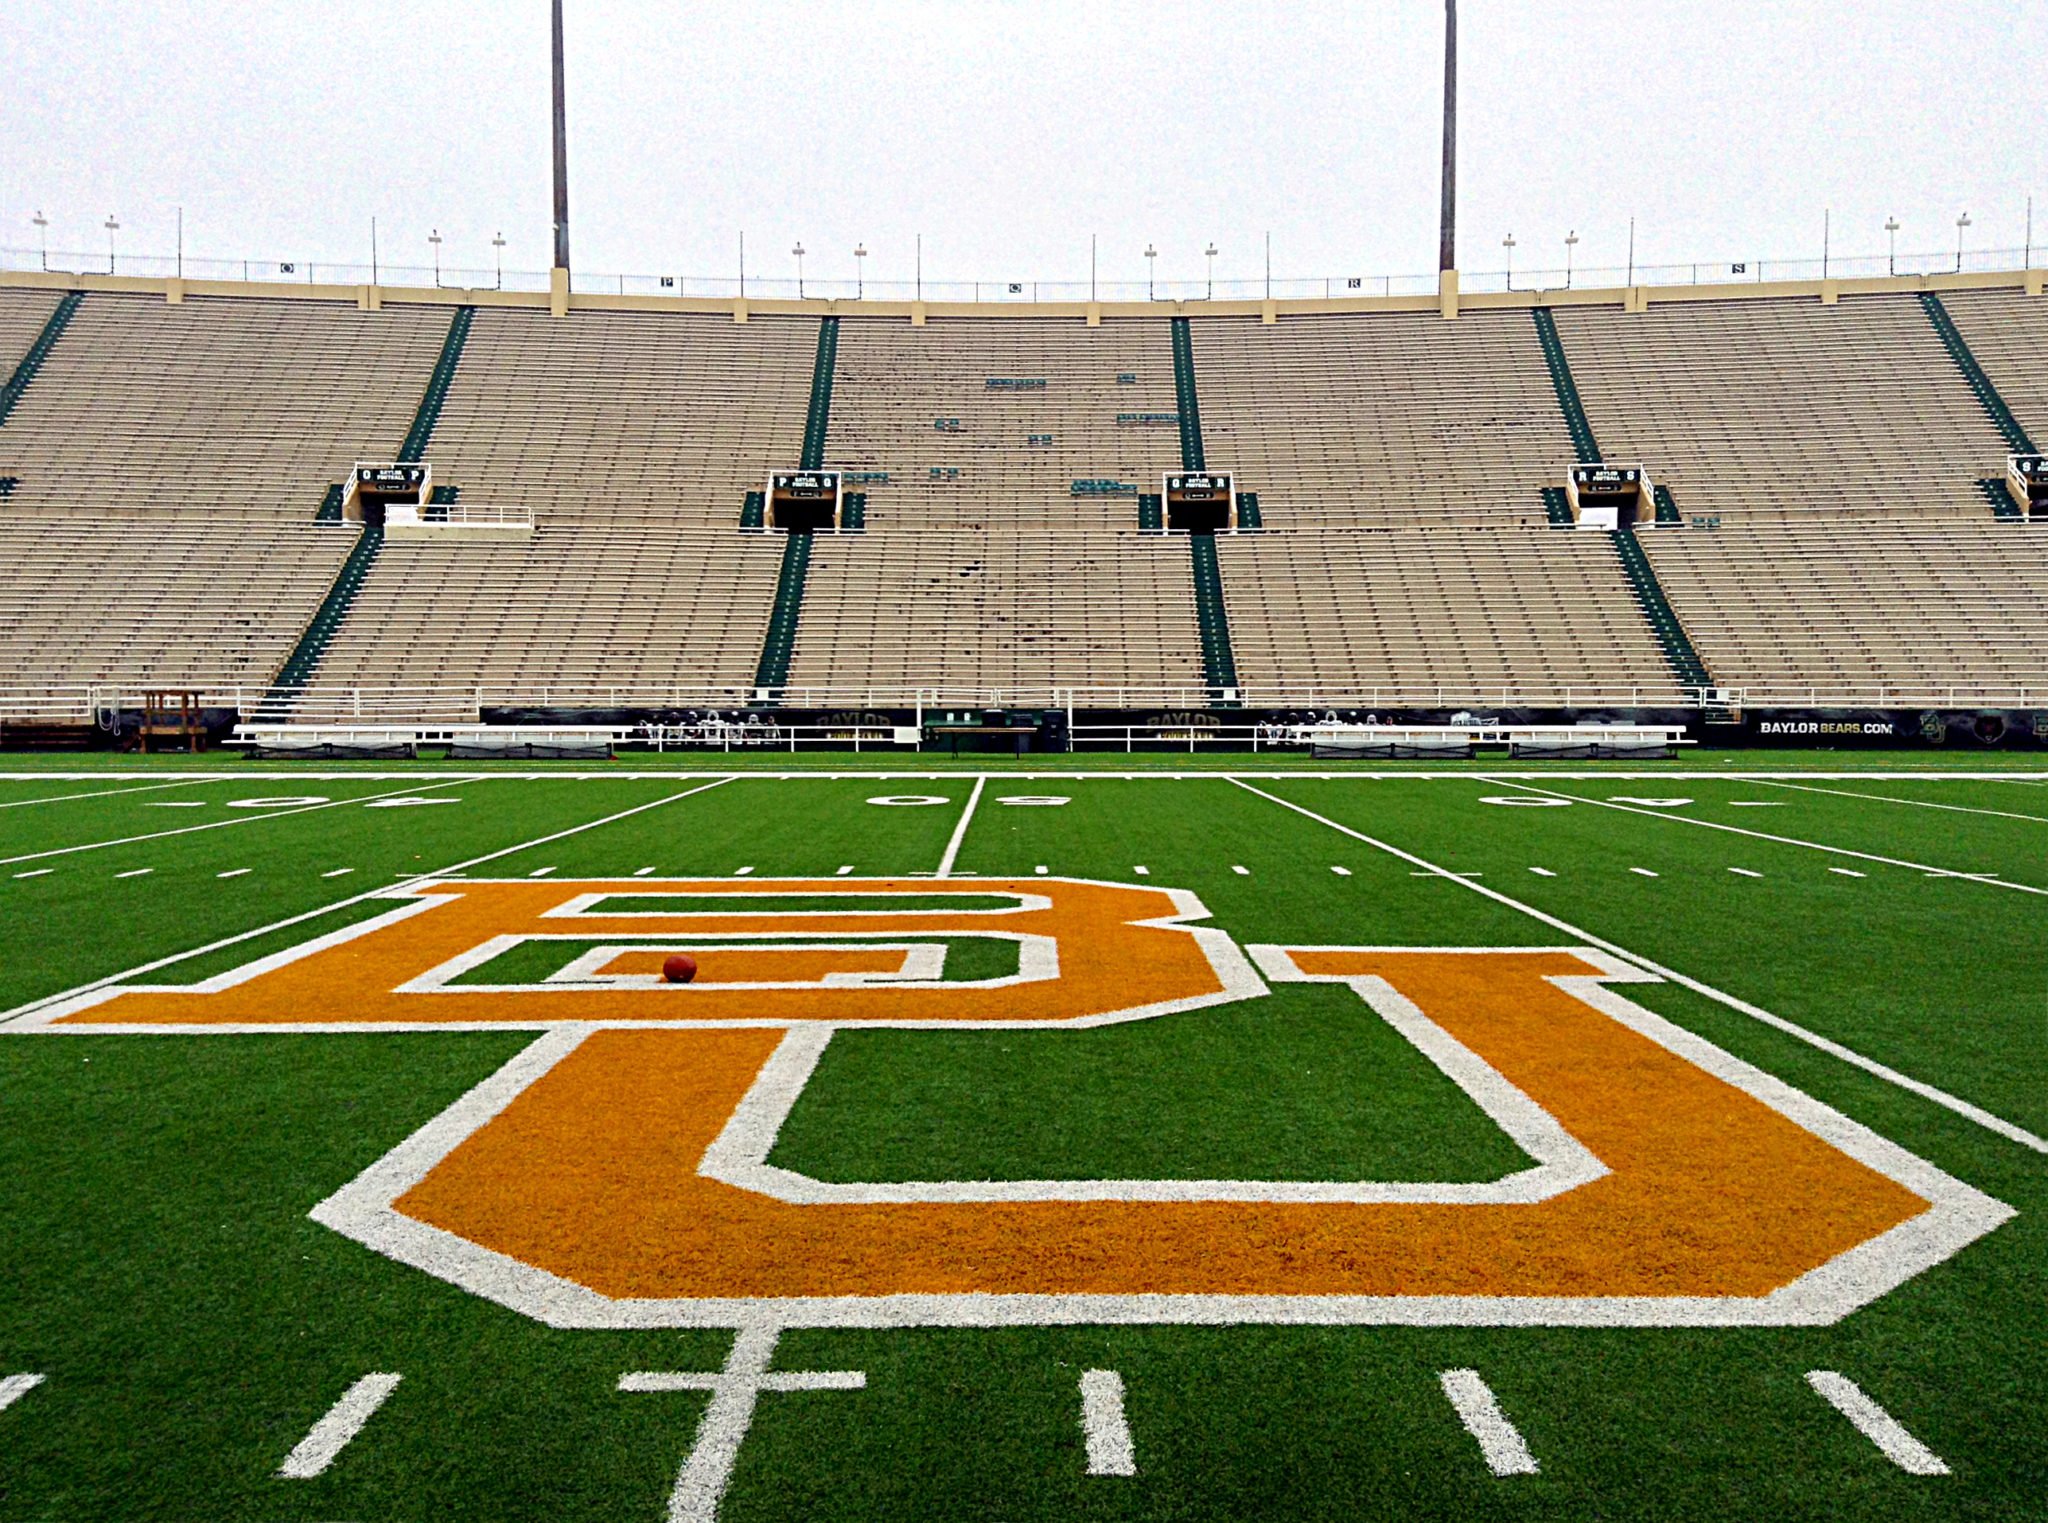 The football field at Baylor University in Waco.